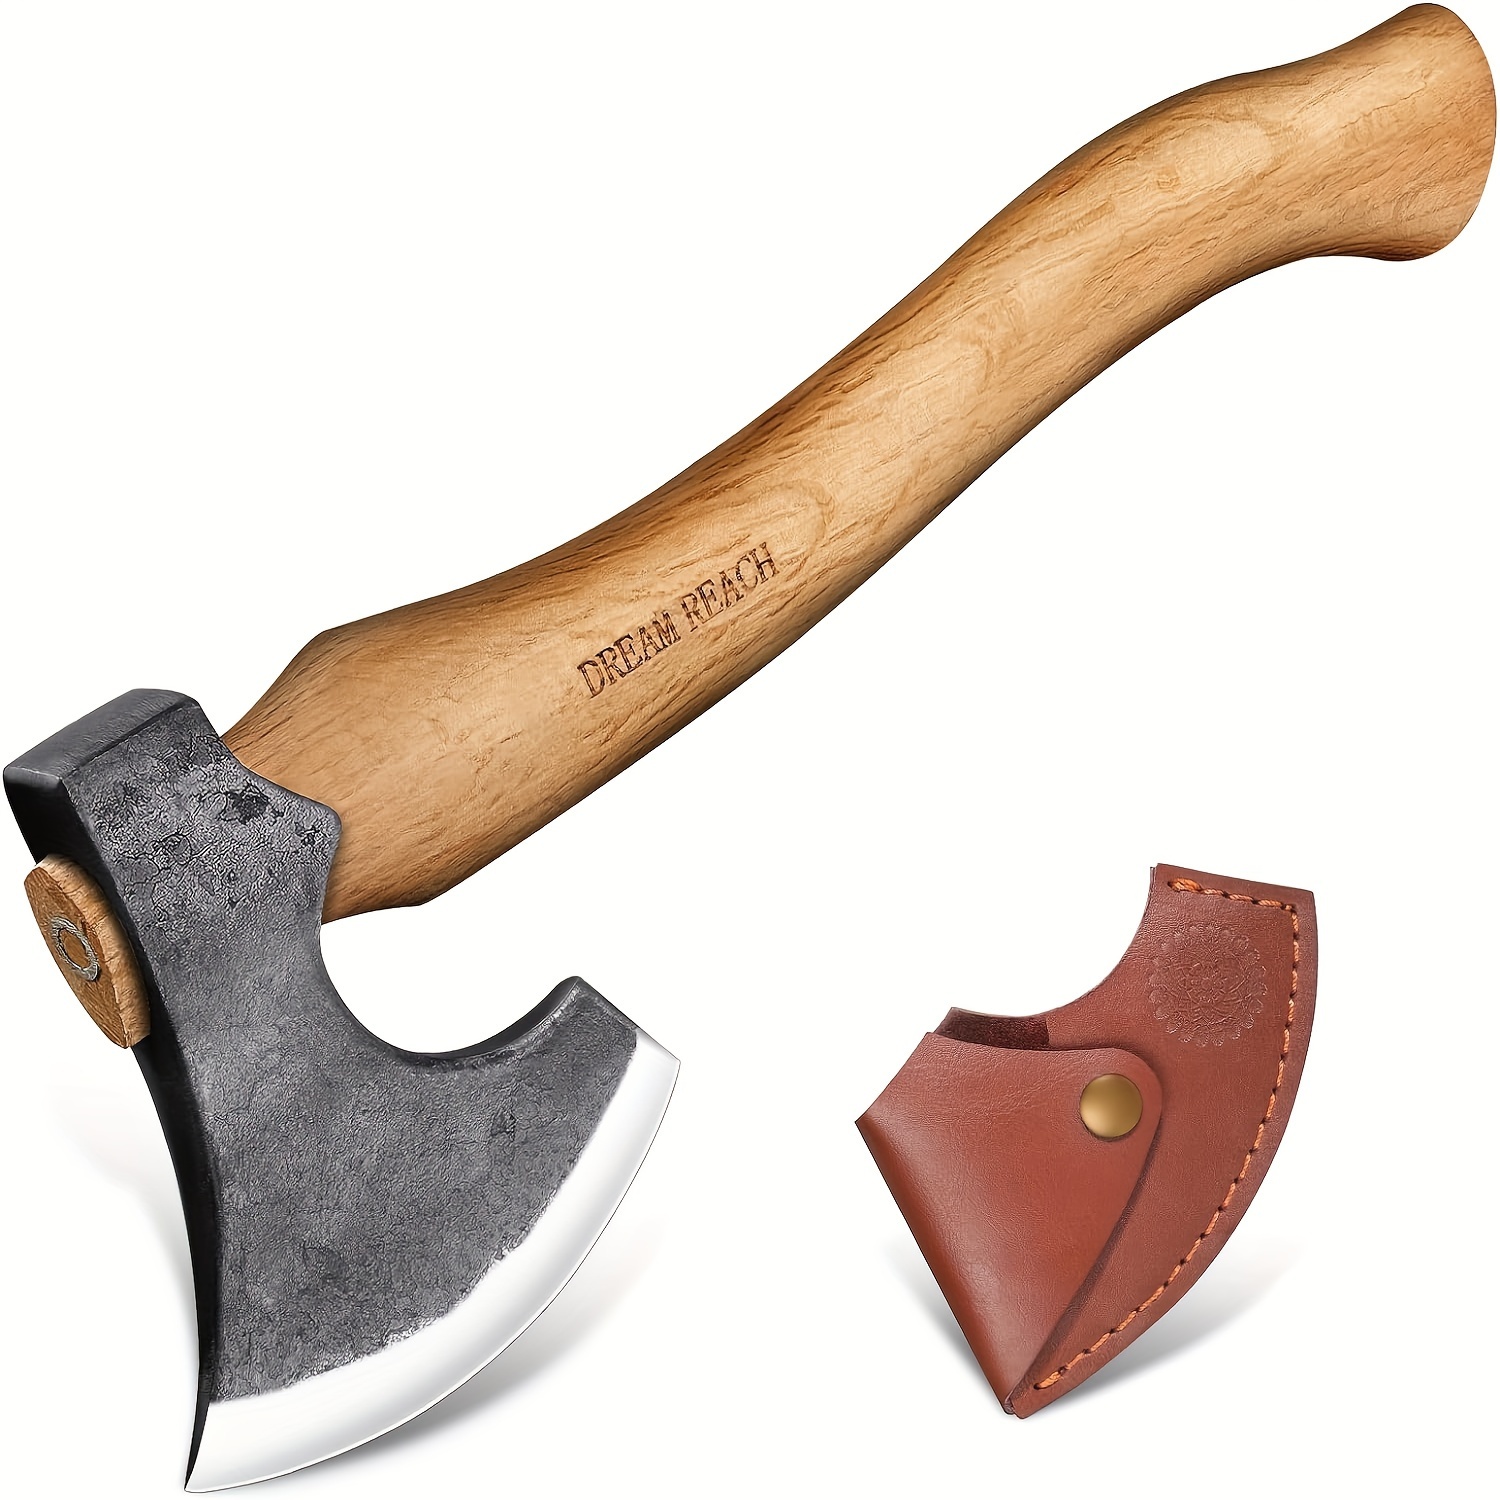 

Hatchet Axe Forged Small Camping Axe Hand Hatchet Outdoor Survival Viking Axe With Sheath Wooden Handle Leisure Hatchet For Bushcraft Forest Garden Men Gifts